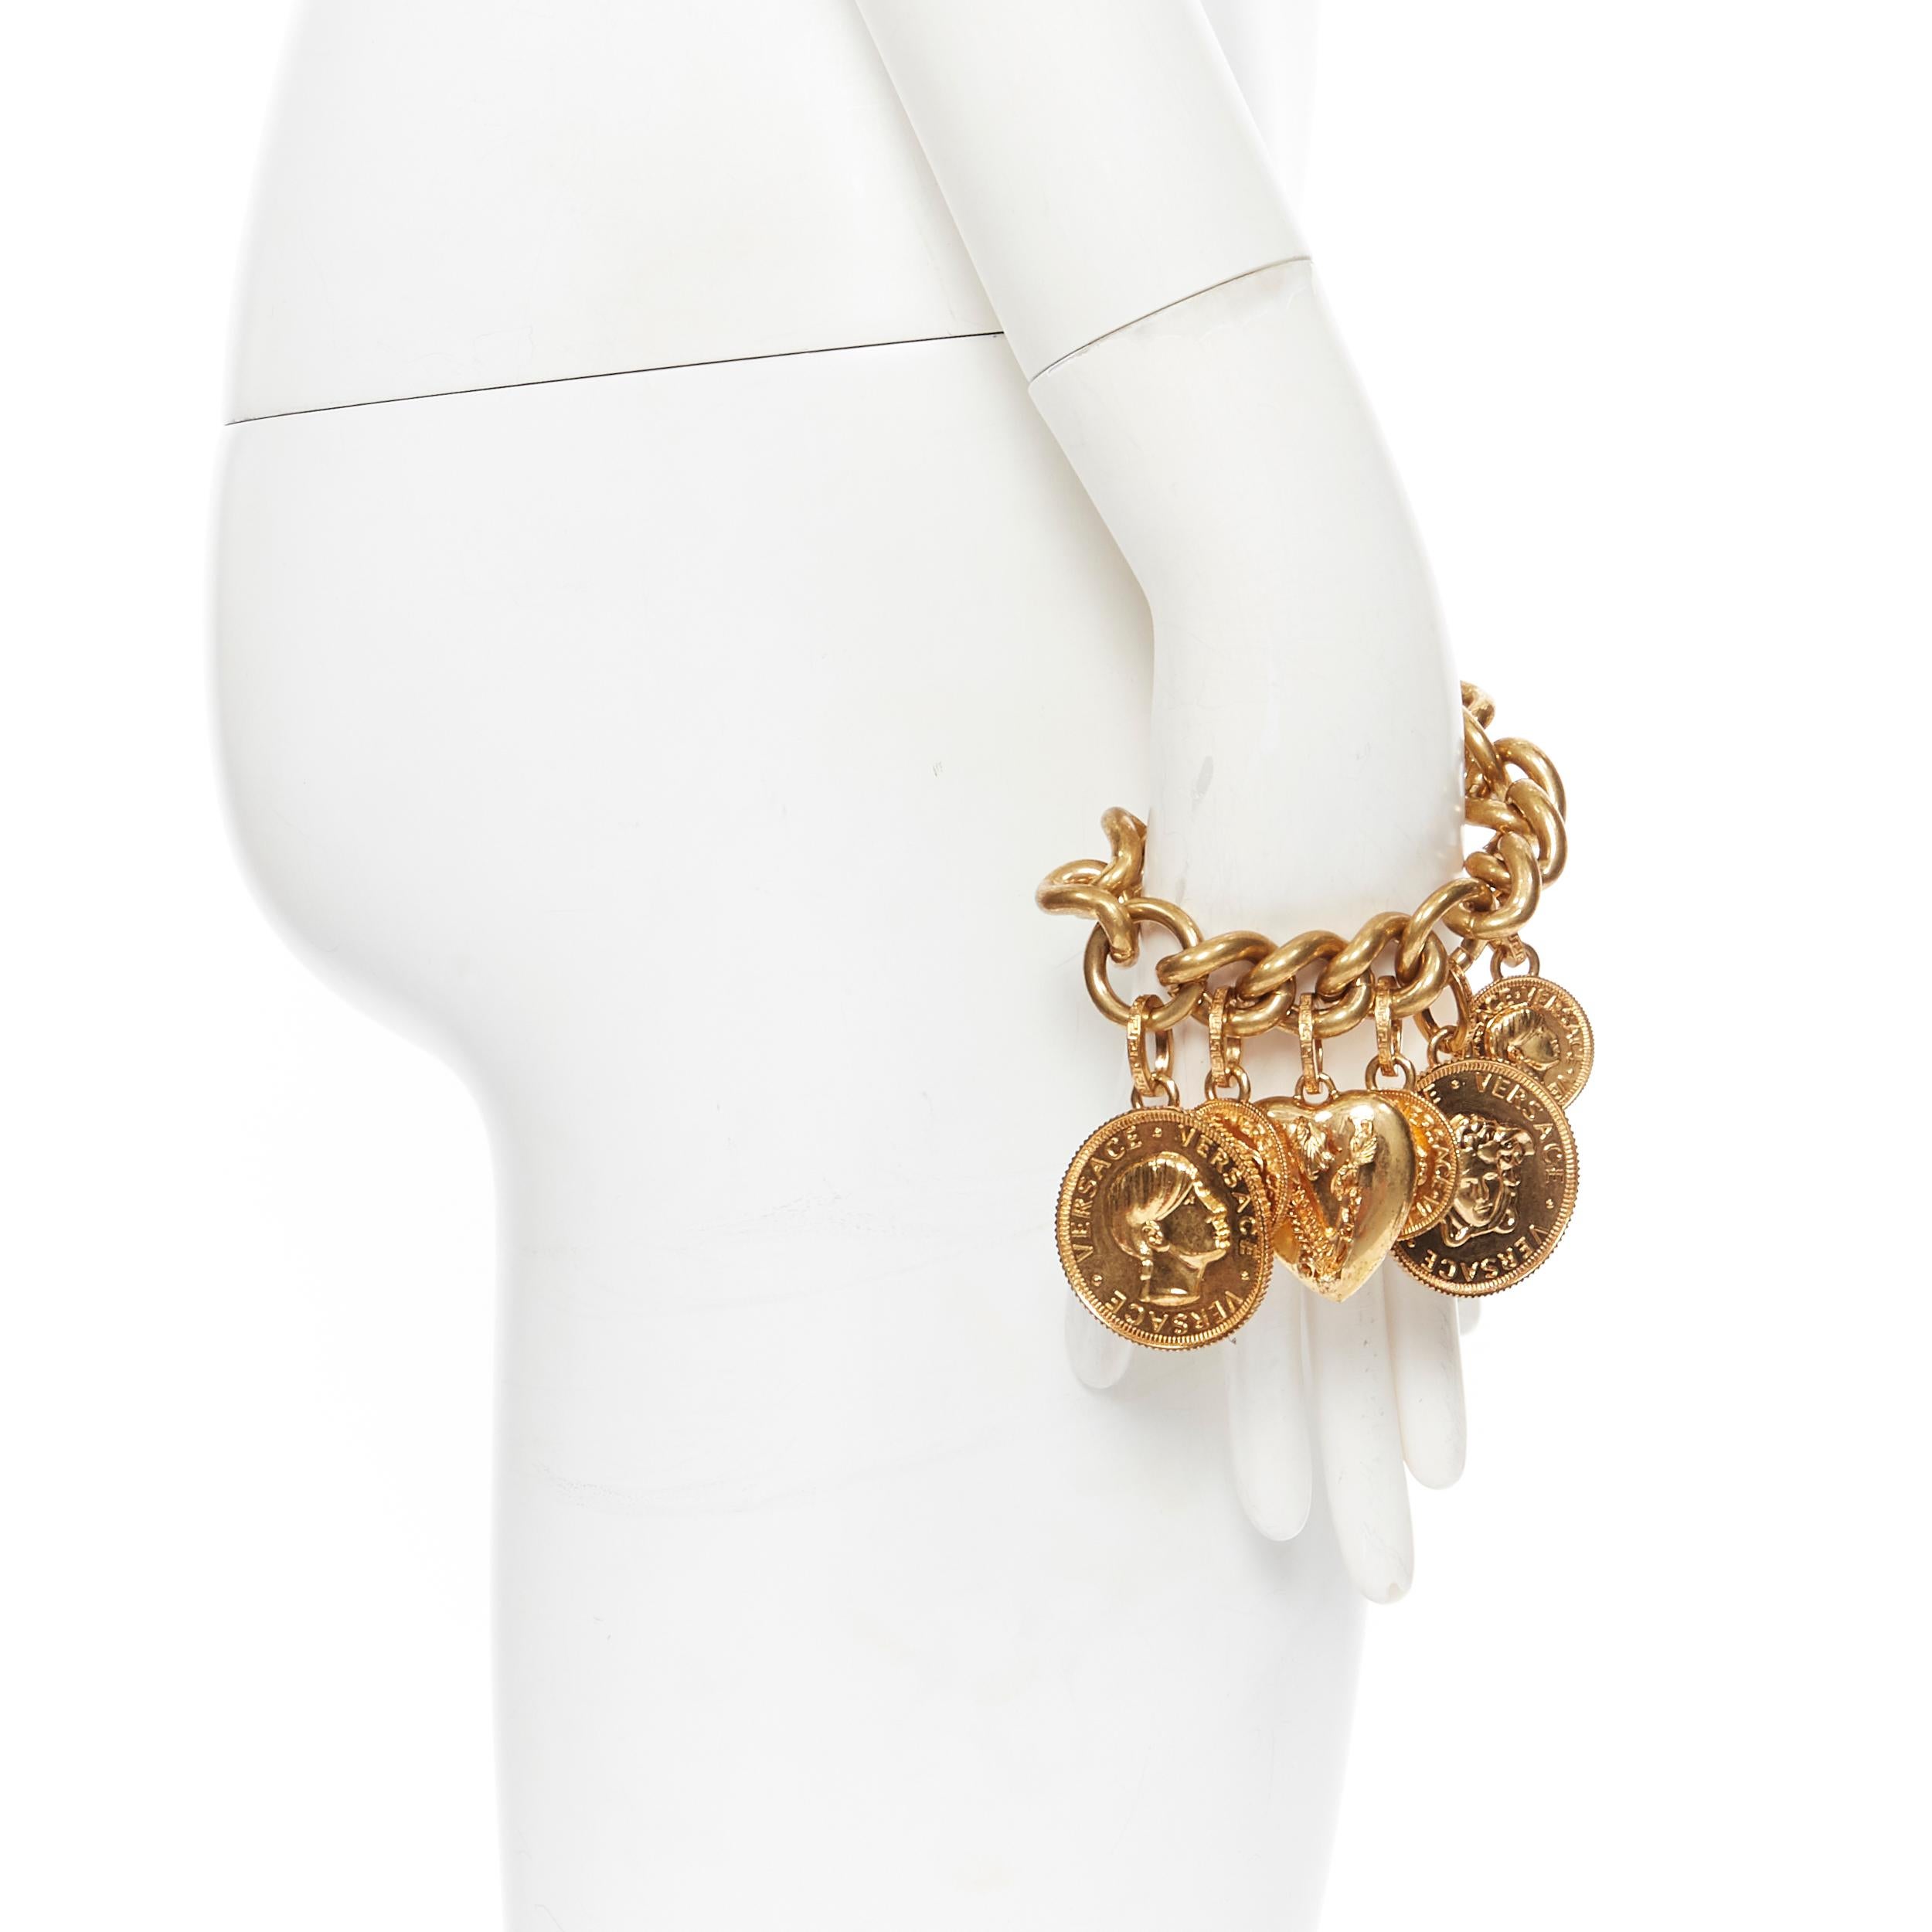 new VERSACE V-Mine Heart Medusa medallion coin charm gold plated chunky bracelet
Brand: Versace
Designer: Donatella Versace
Collection: 2019
Model Name / Style: Chunky bracelet
Material: Metal
Color: Gold
Pattern: Solid
Closure: Clasp
Extra Detail: